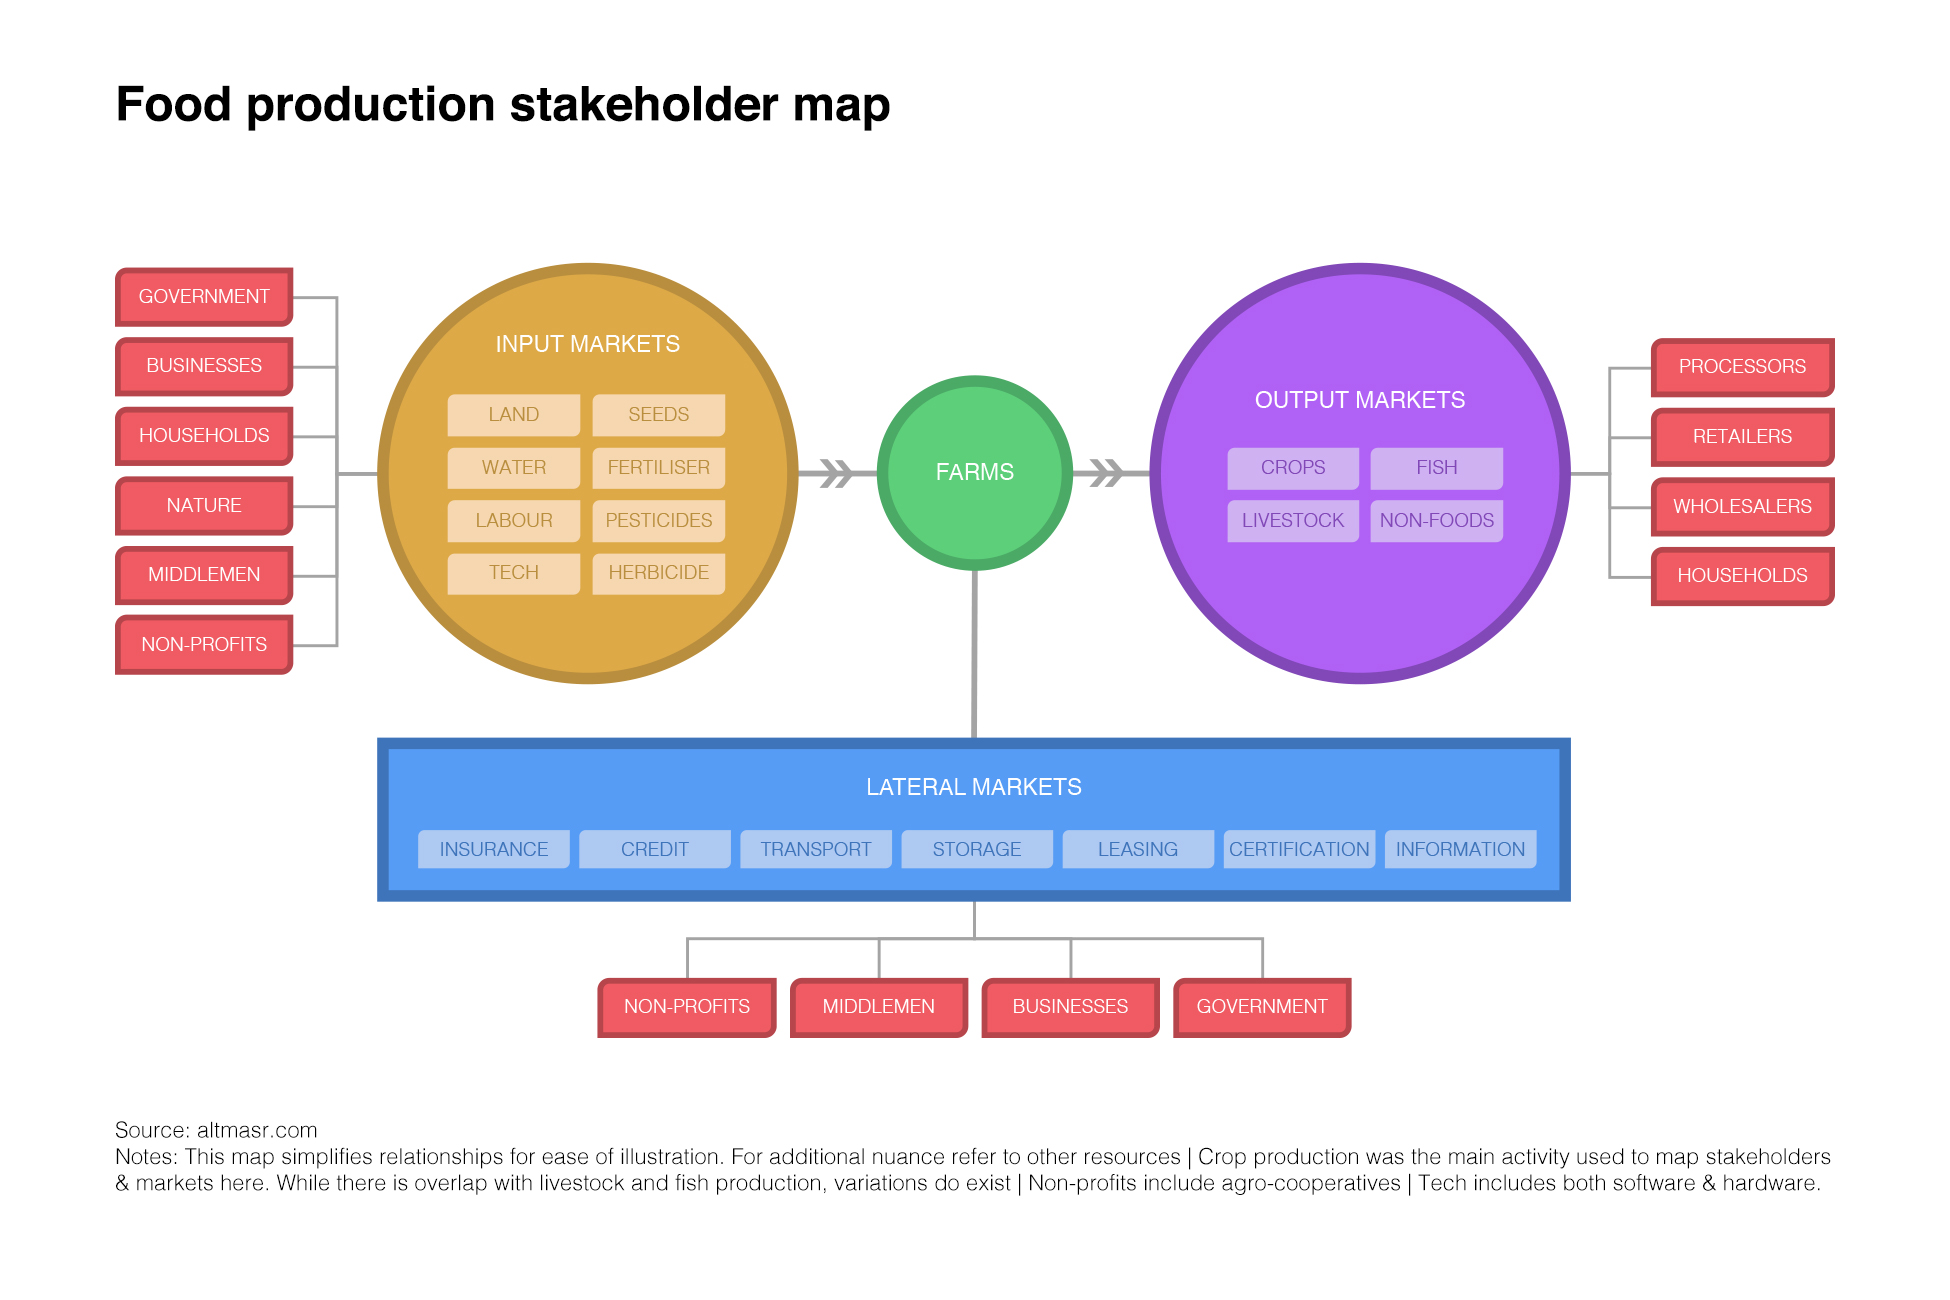 A map of the food production process and stakeholders